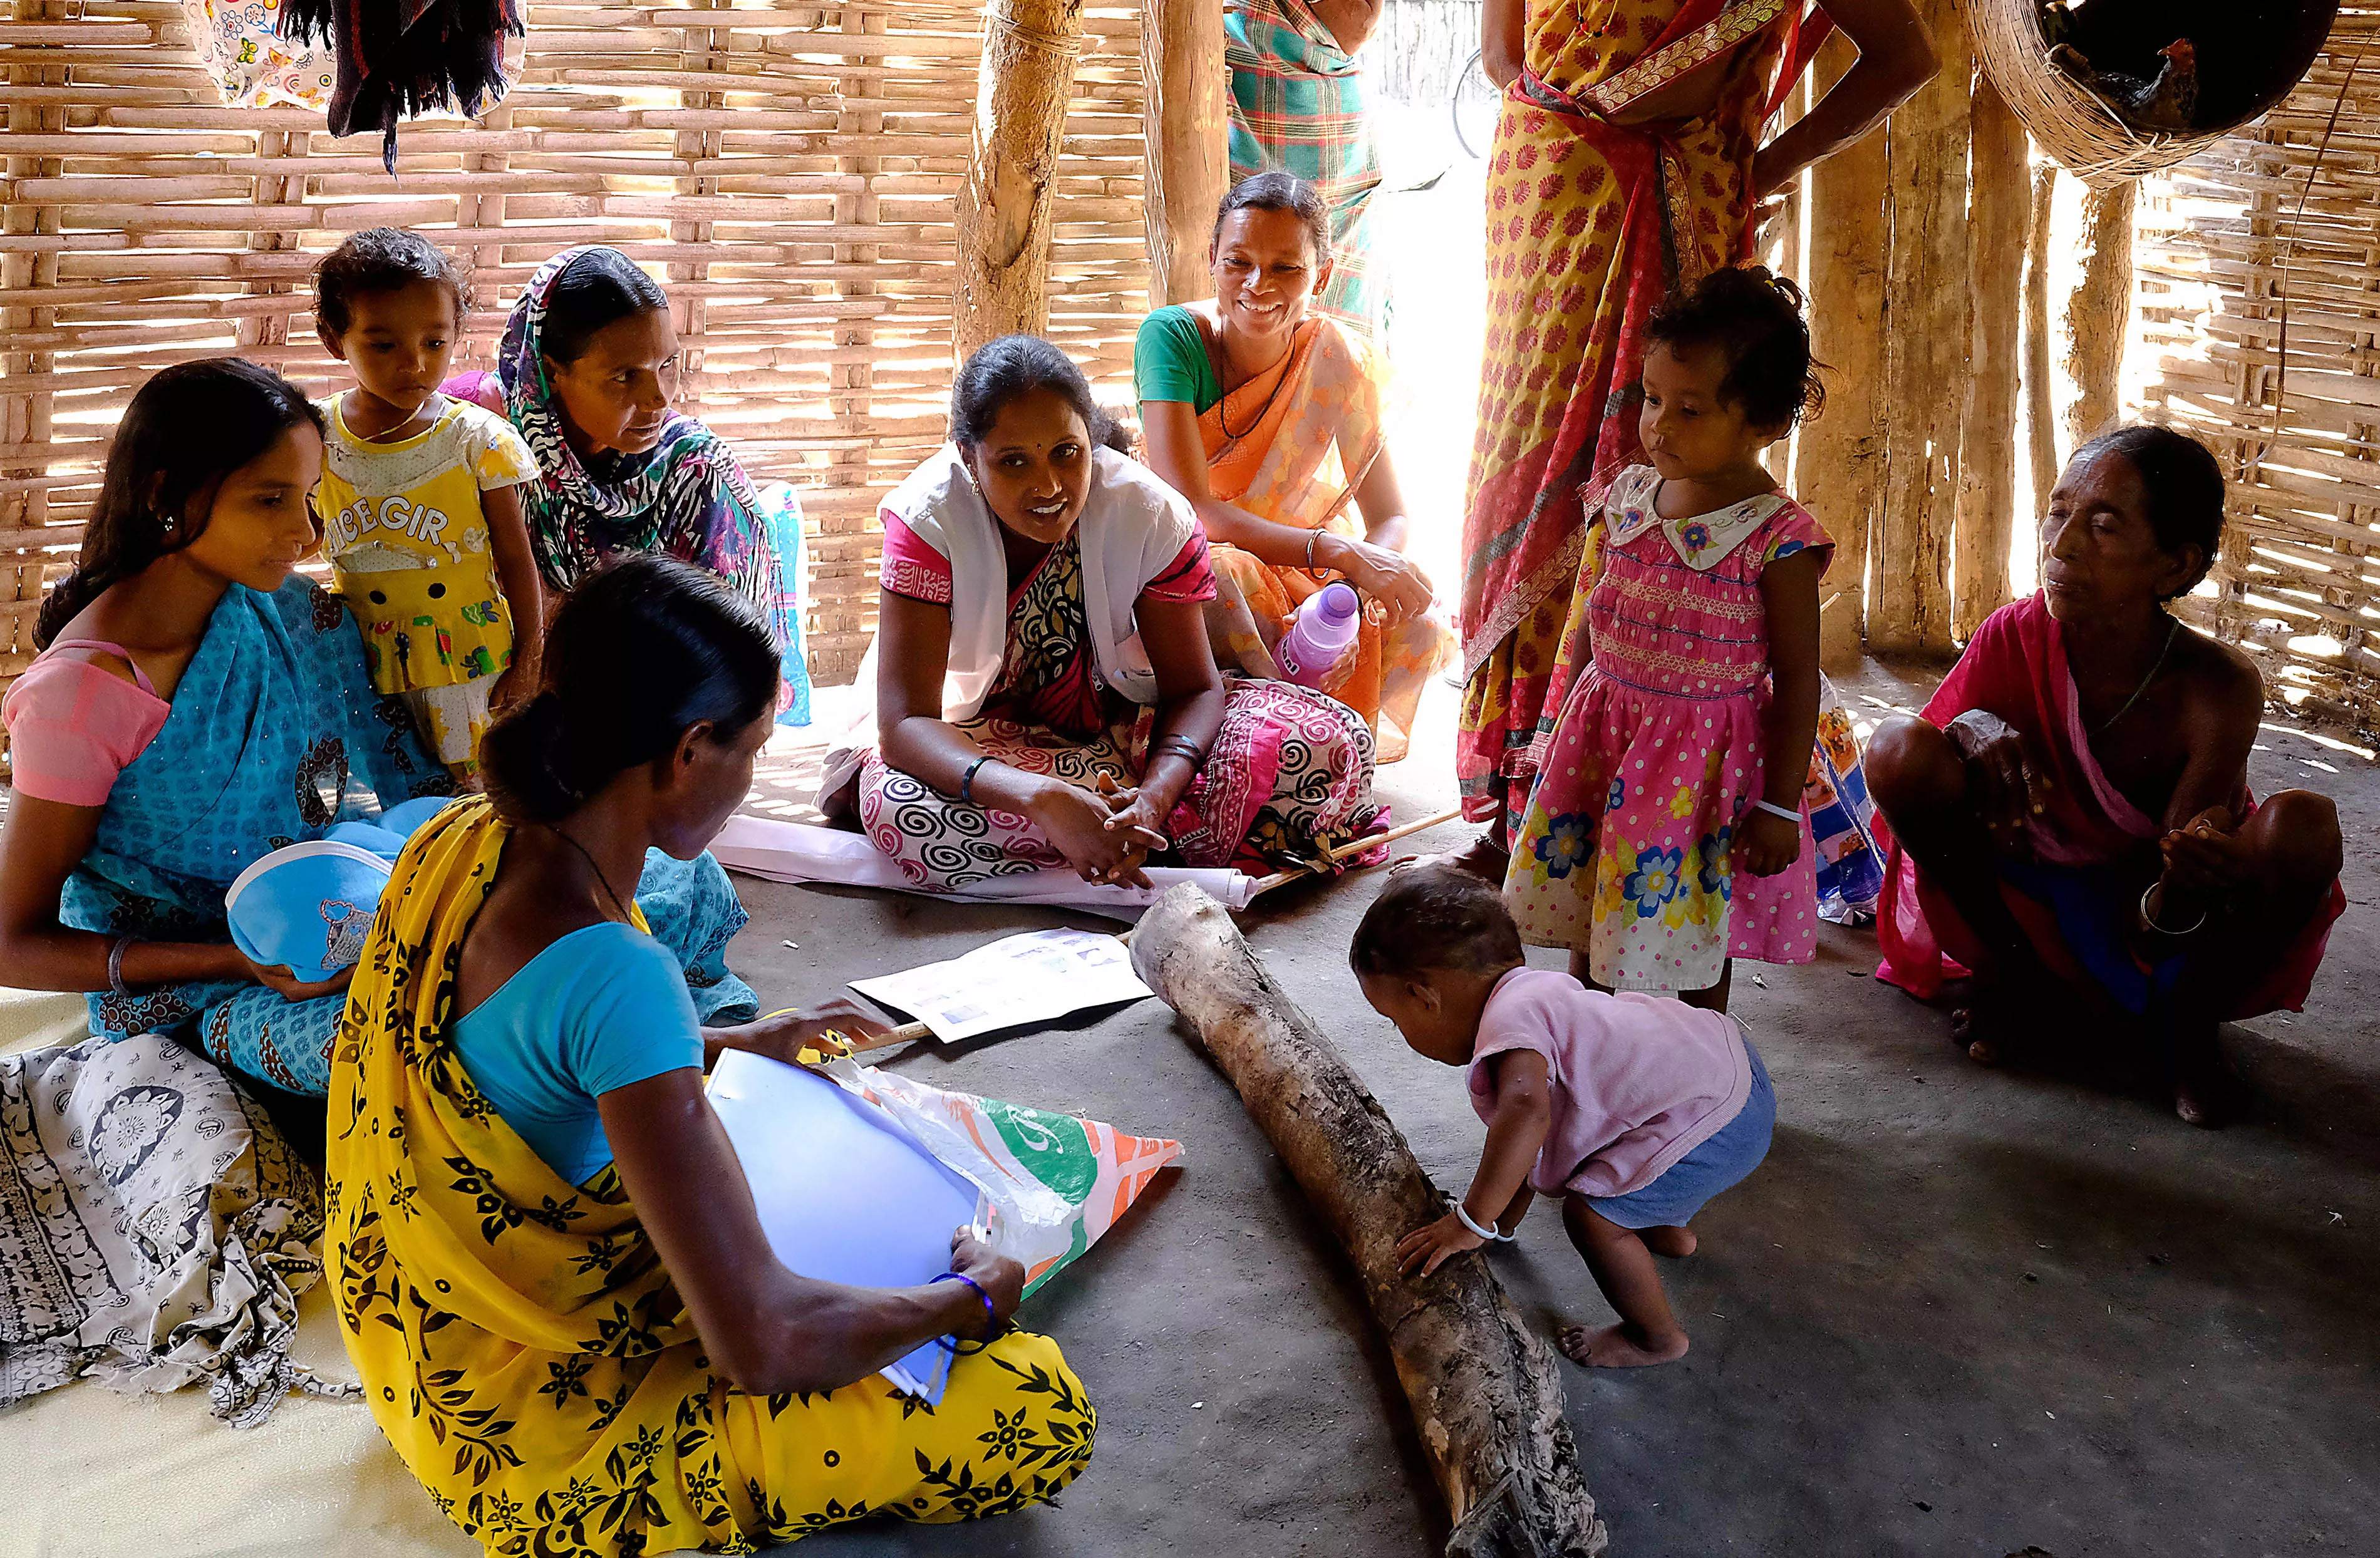 A Medecins Sans Frontieres (MSF) health promoter holds a health education information session for mothers in Aragata village, Chhattisgarh, India.